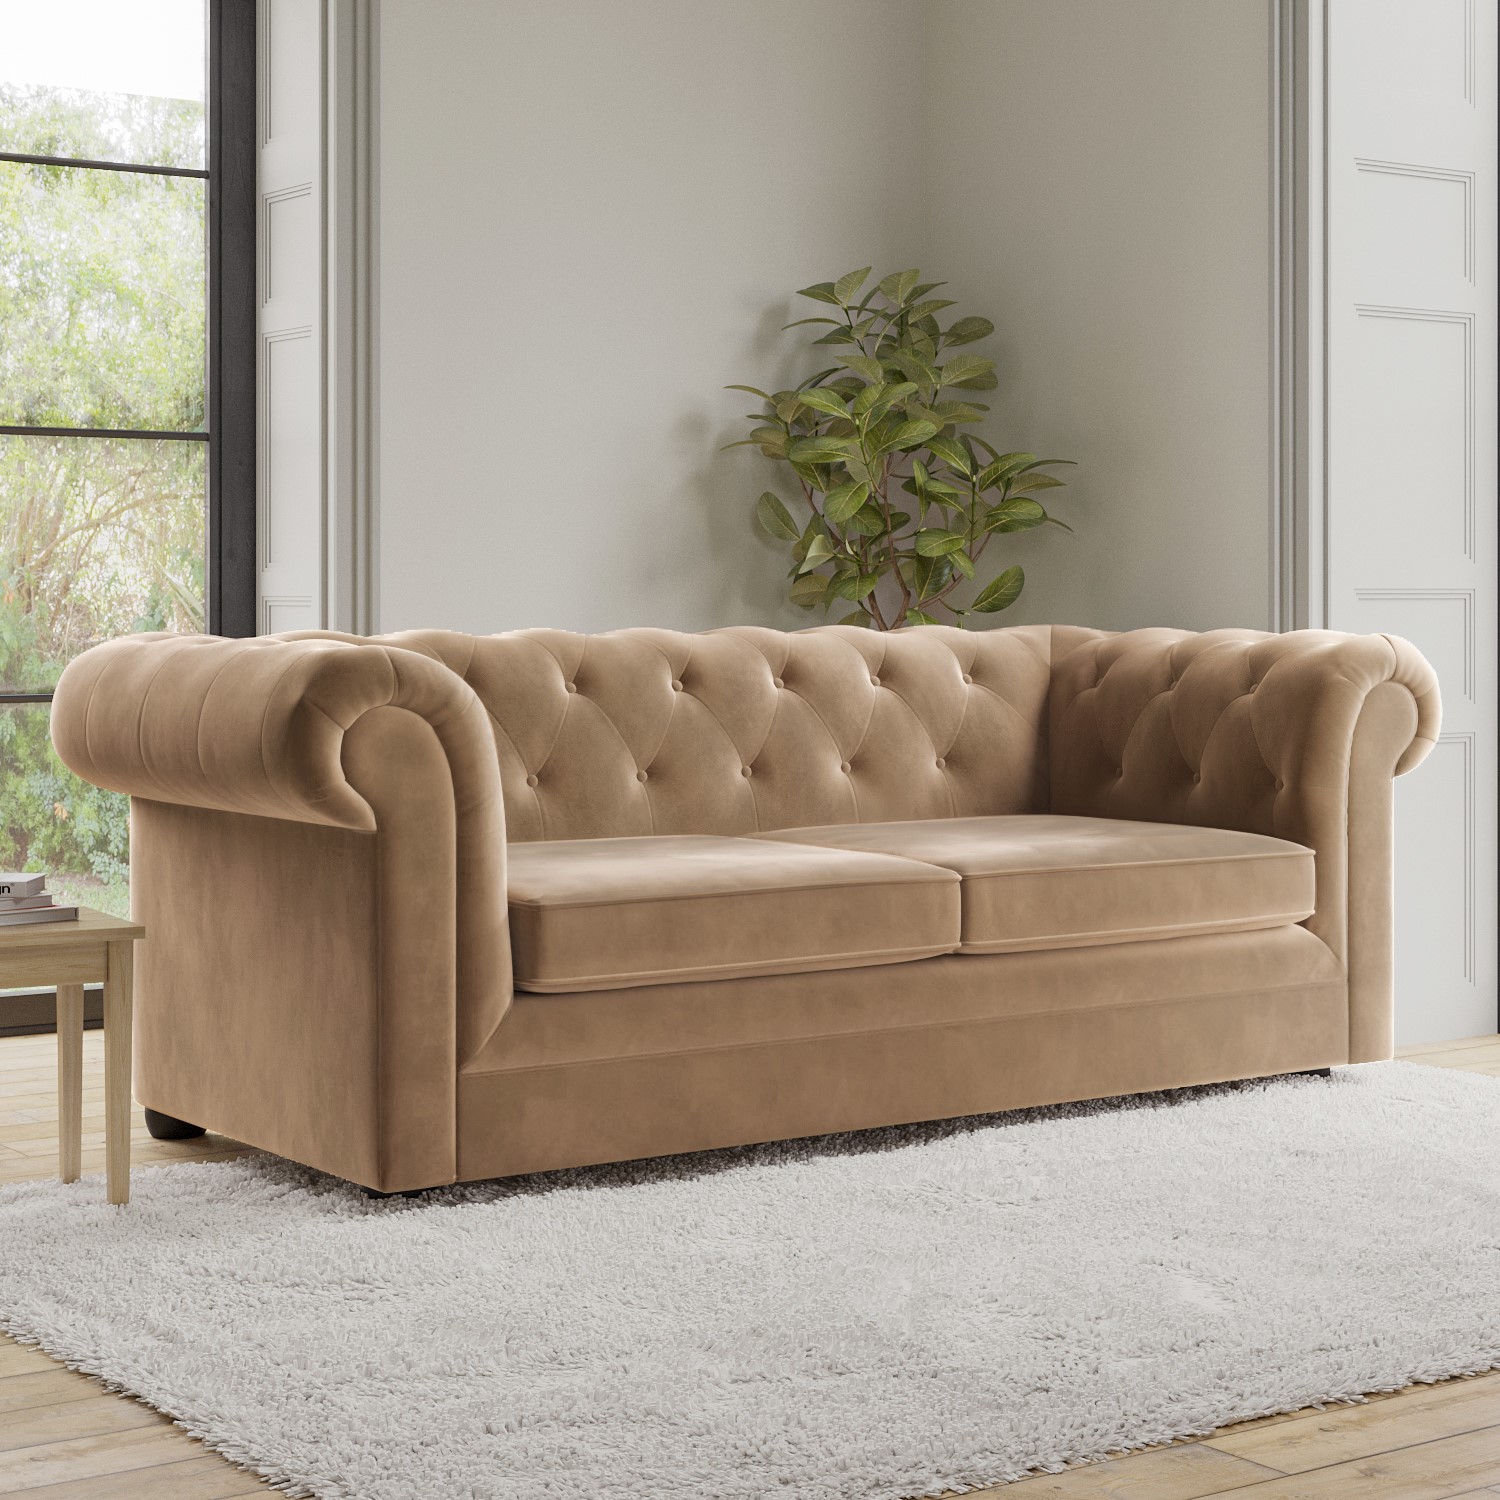 Photo of Beige velvet chesterfield pull out sofa bed - seats 3 - bronte